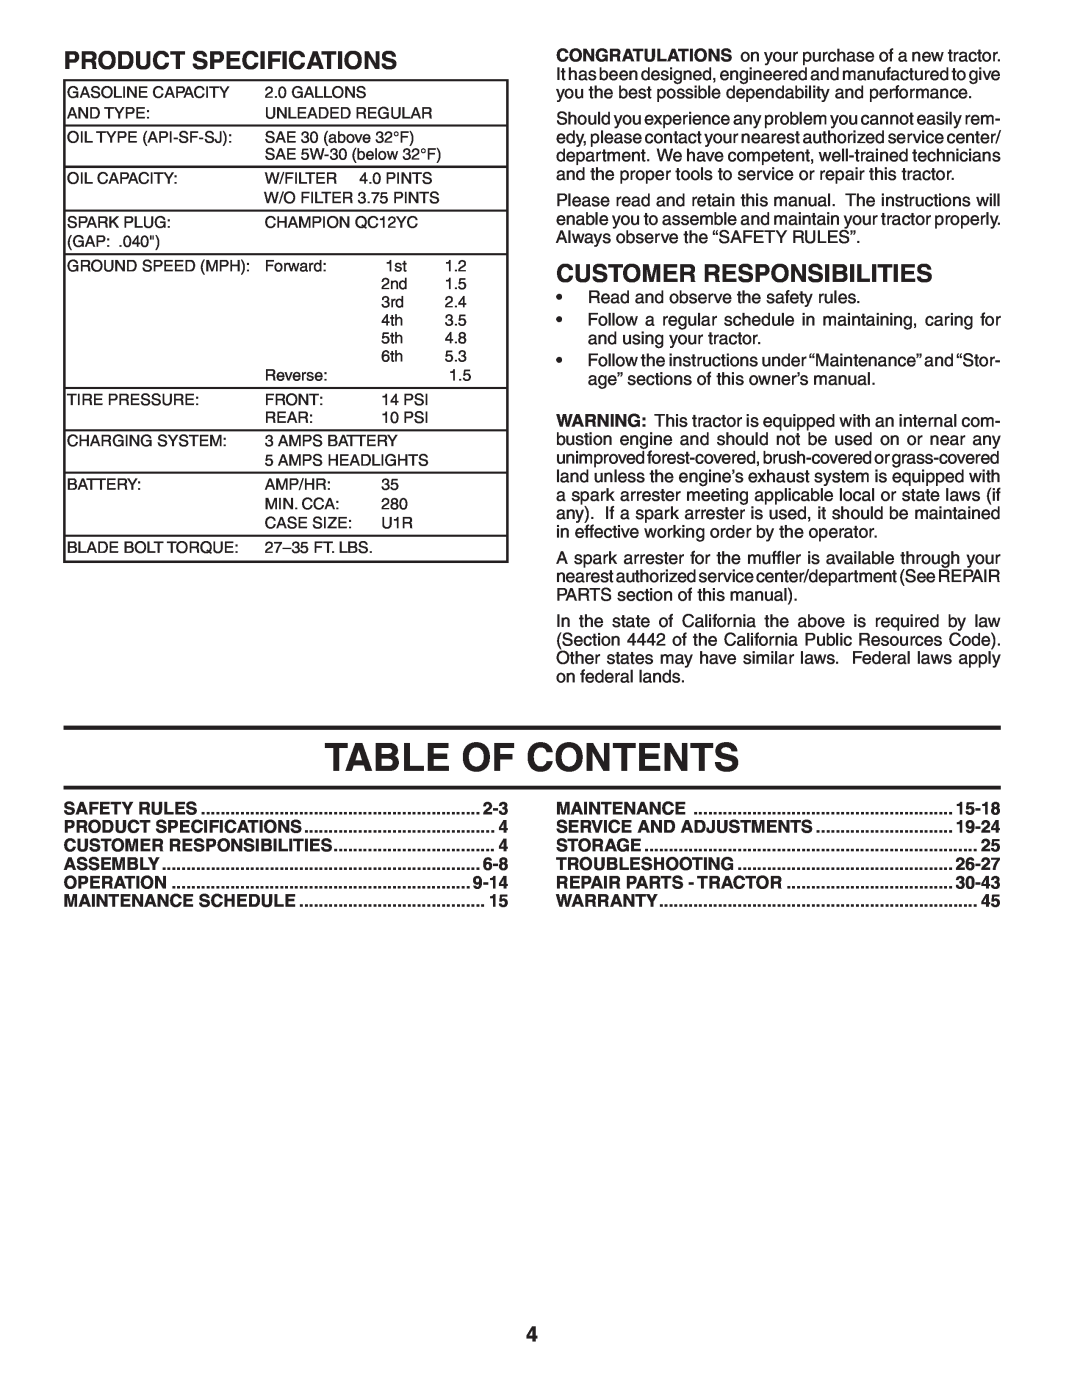 Poulan 954569707, 185491 owner manual Table Of Contents, Product Specifications, Customer Responsibilities 